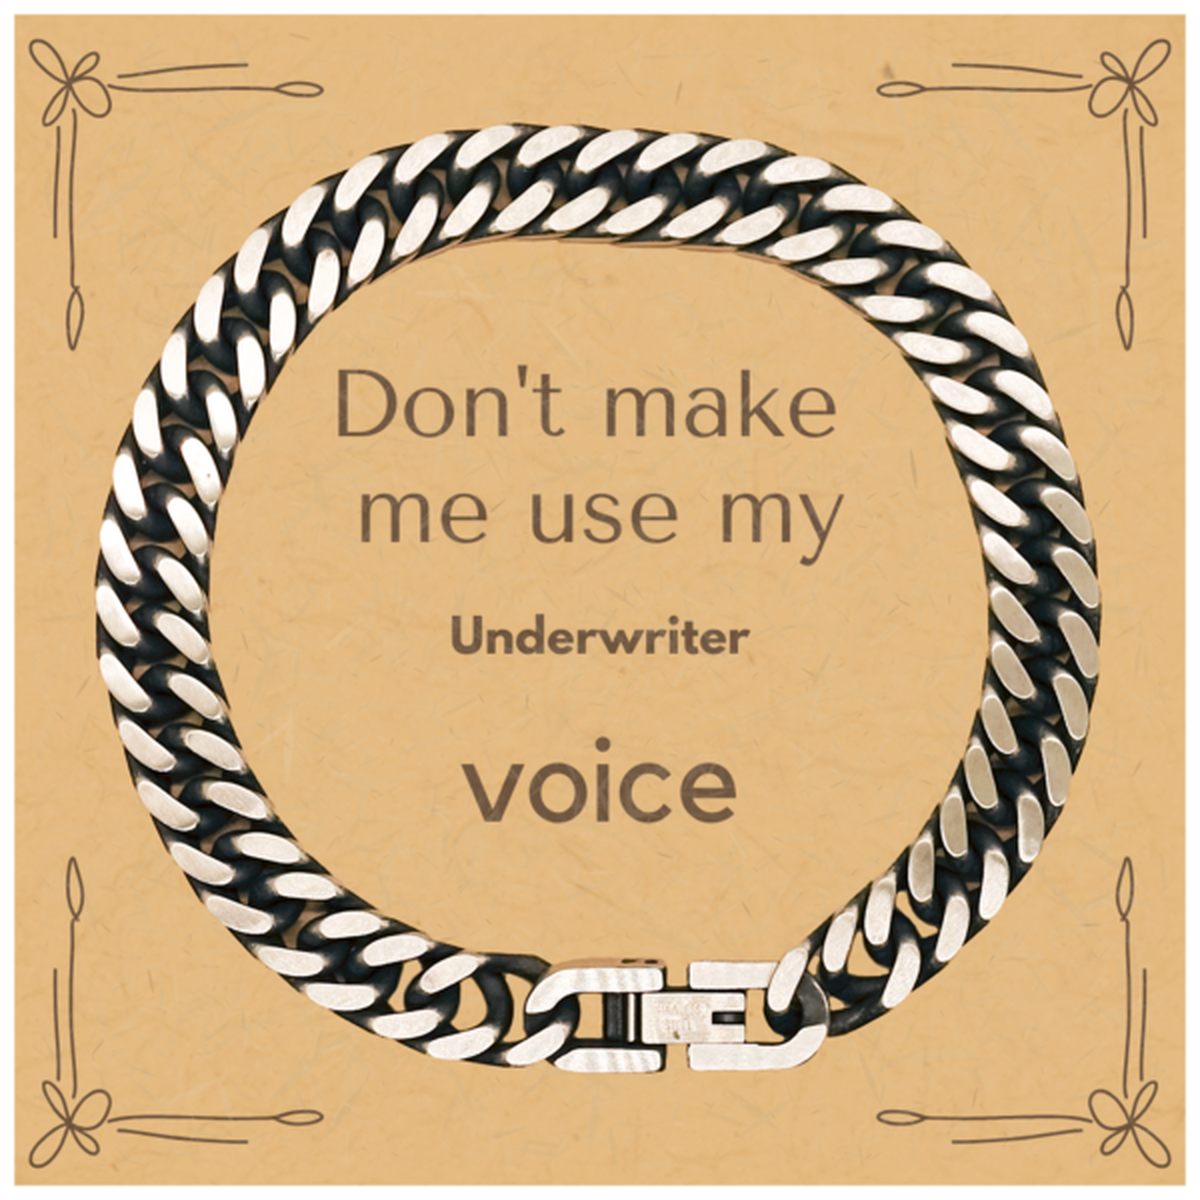 Don't make me use my Underwriter voice, Sarcasm Underwriter Card Gifts, Christmas Underwriter Cuban Link Chain Bracelet Birthday Unique Gifts For Underwriter Coworkers, Men, Women, Colleague, Friends